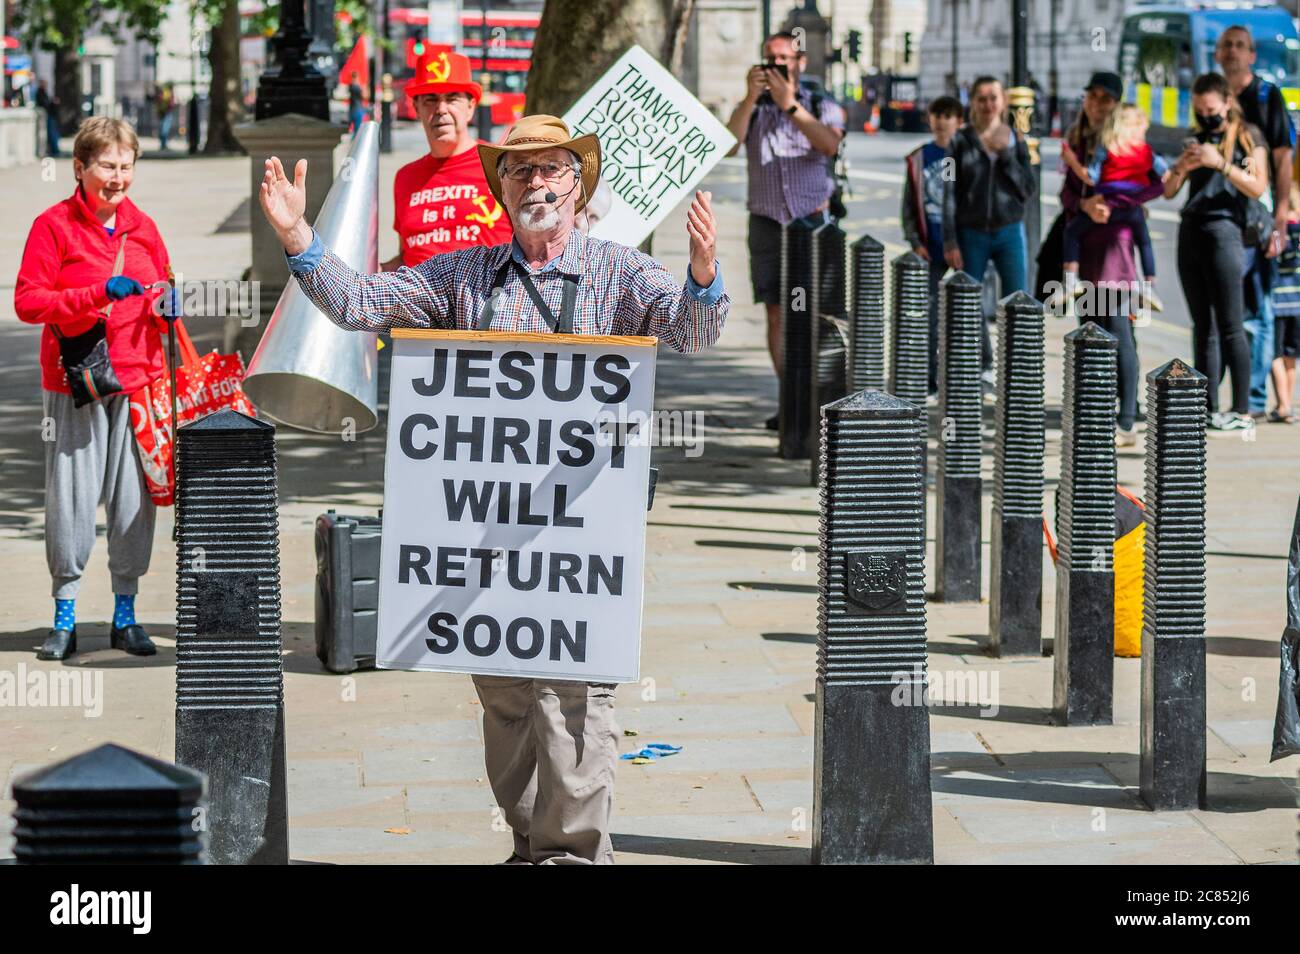 https://c8.alamy.com/comp/2C852J6/a-christian-evangelist-urges-repentance-as-the-end-of-the-world-is-nigh-protestors-from-a-free-assange-group-pro-palestine-anti-brexit-and-a-christian-evangelist-amongst-others-gather-outside-while-us-secretary-of-state-michael-r-pompeo-is-in-downing-street-to-meet-with-prime-minister-boris-johnson-and-foreign-secretary-dominic-raab-where-they-discuss-global-priorities-including-the-covid-19-economic-recovery-plans-issues-related-to-the-peoples-republic-of-china-prc-and-hong-kong-and-the-us-uk-free-trade-agreement-negotiations-2C852J6.jpg